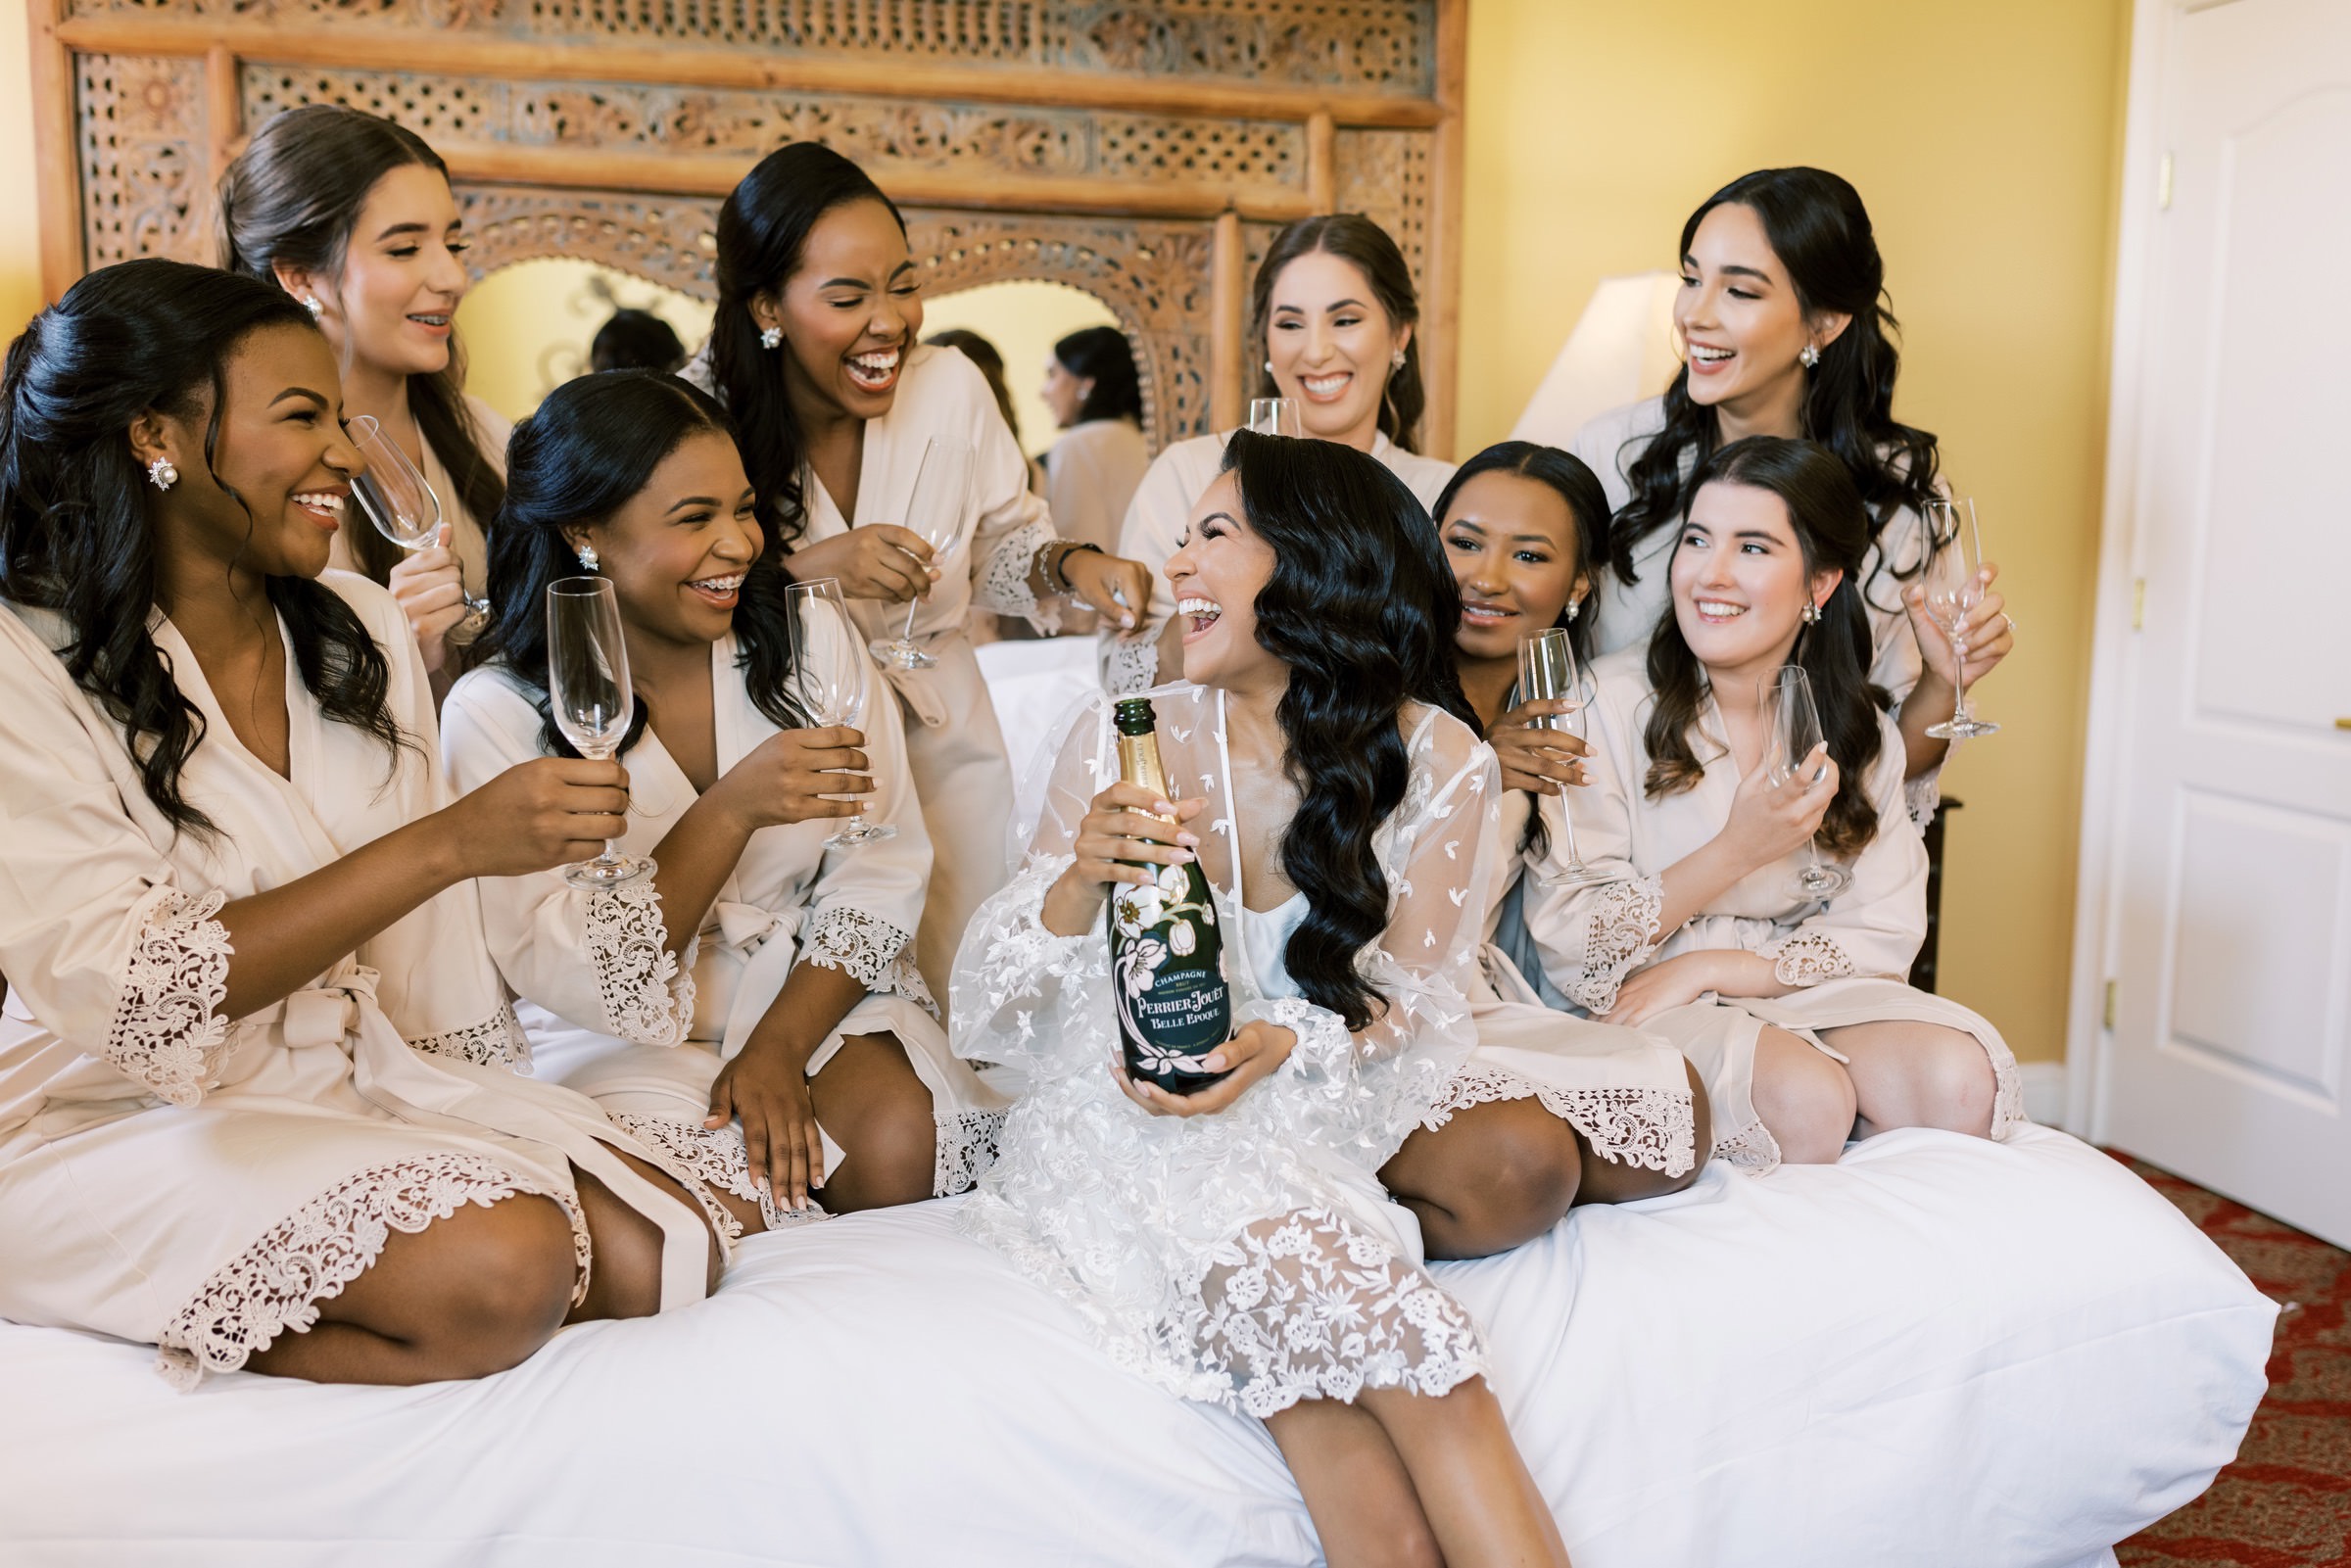 Fun Bridal party photo - Photography: Brooke Images